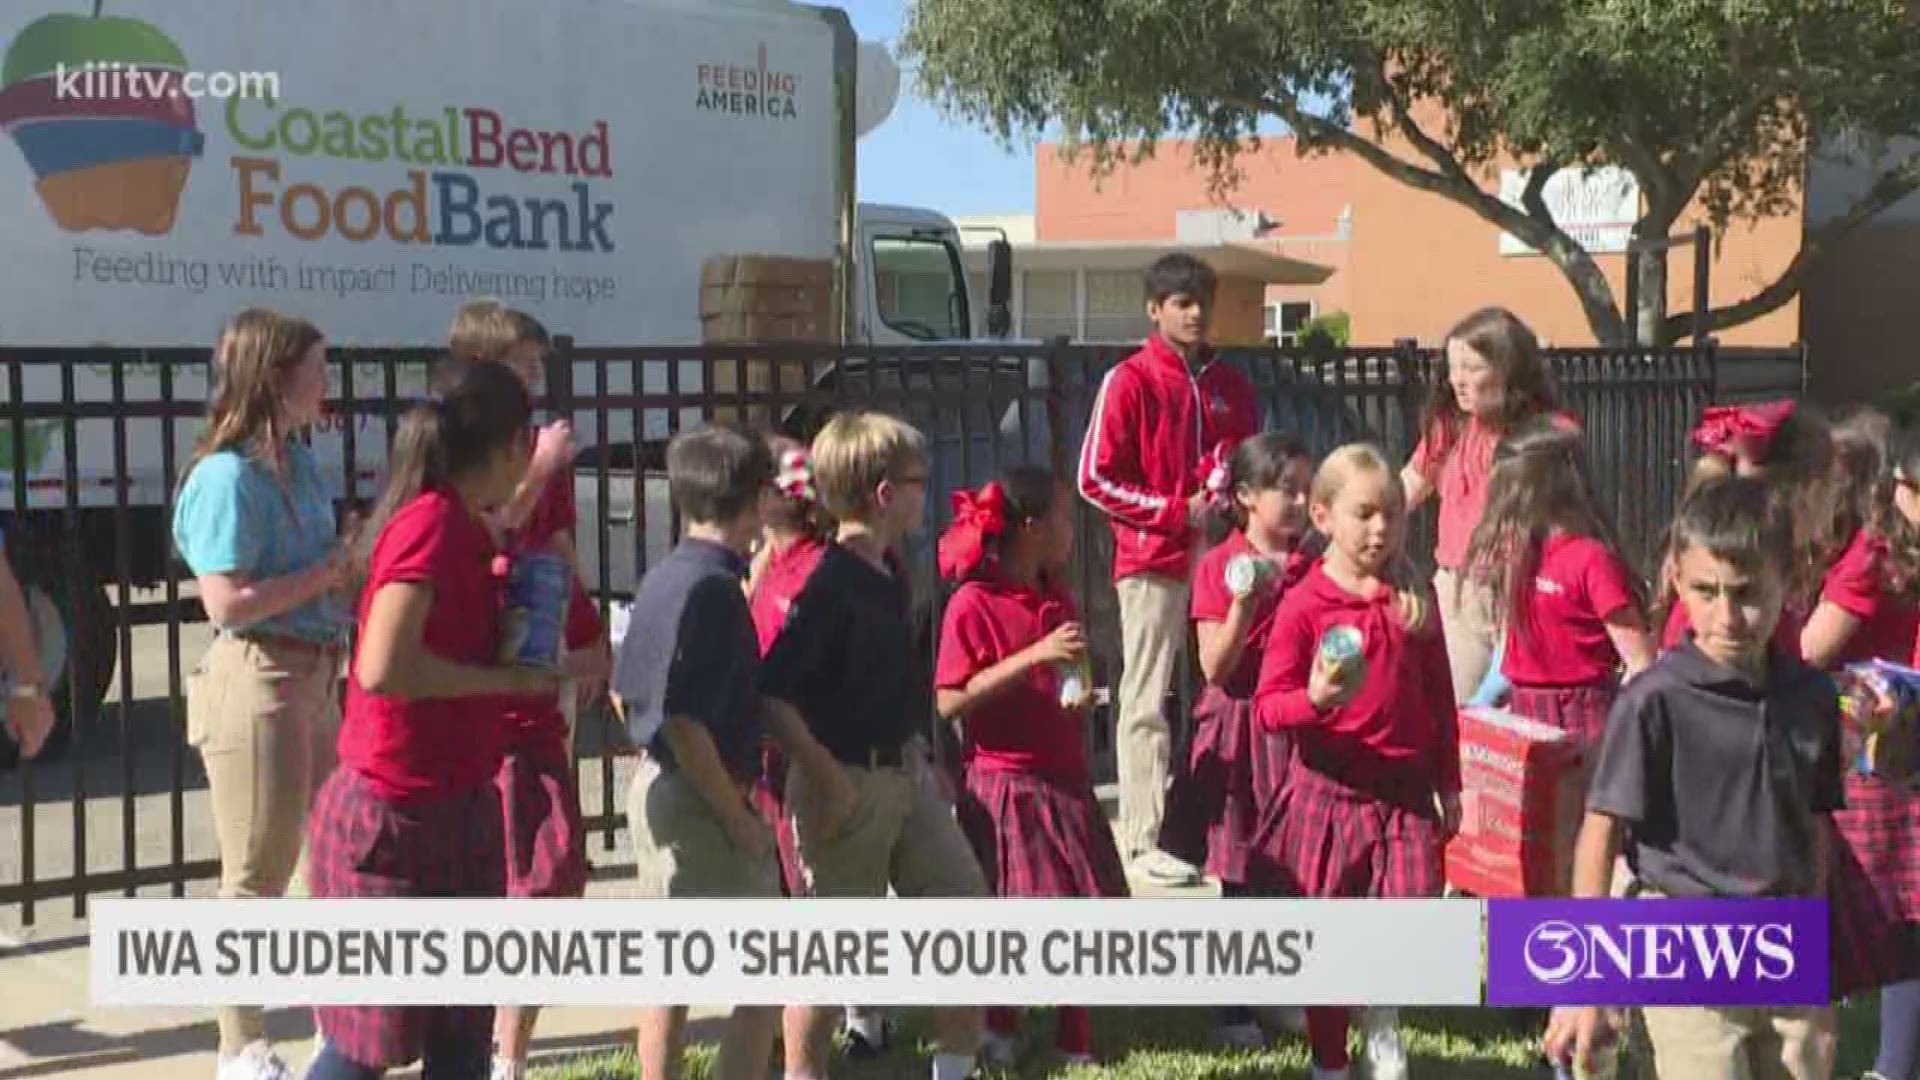 3News' Share Your Christmas food drive received some help from students at Incarnate Word Academy.